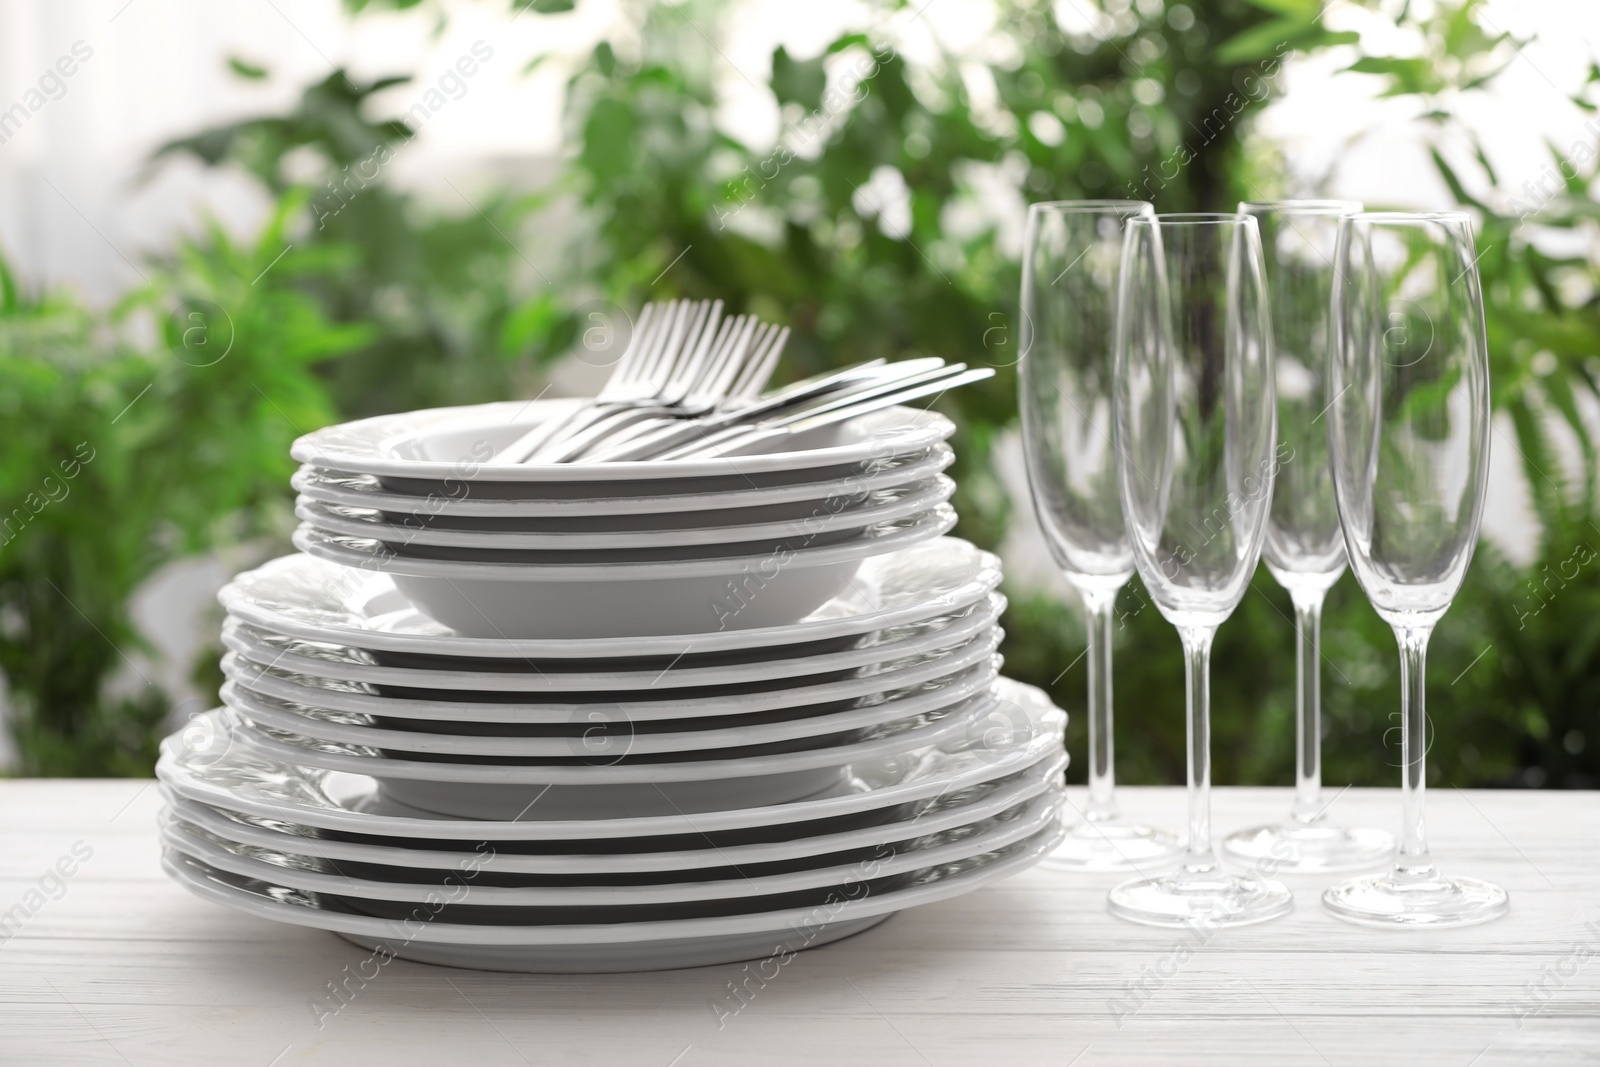 Photo of Set of clean dishware, cutlery and champagne glasses on white table against blurred background